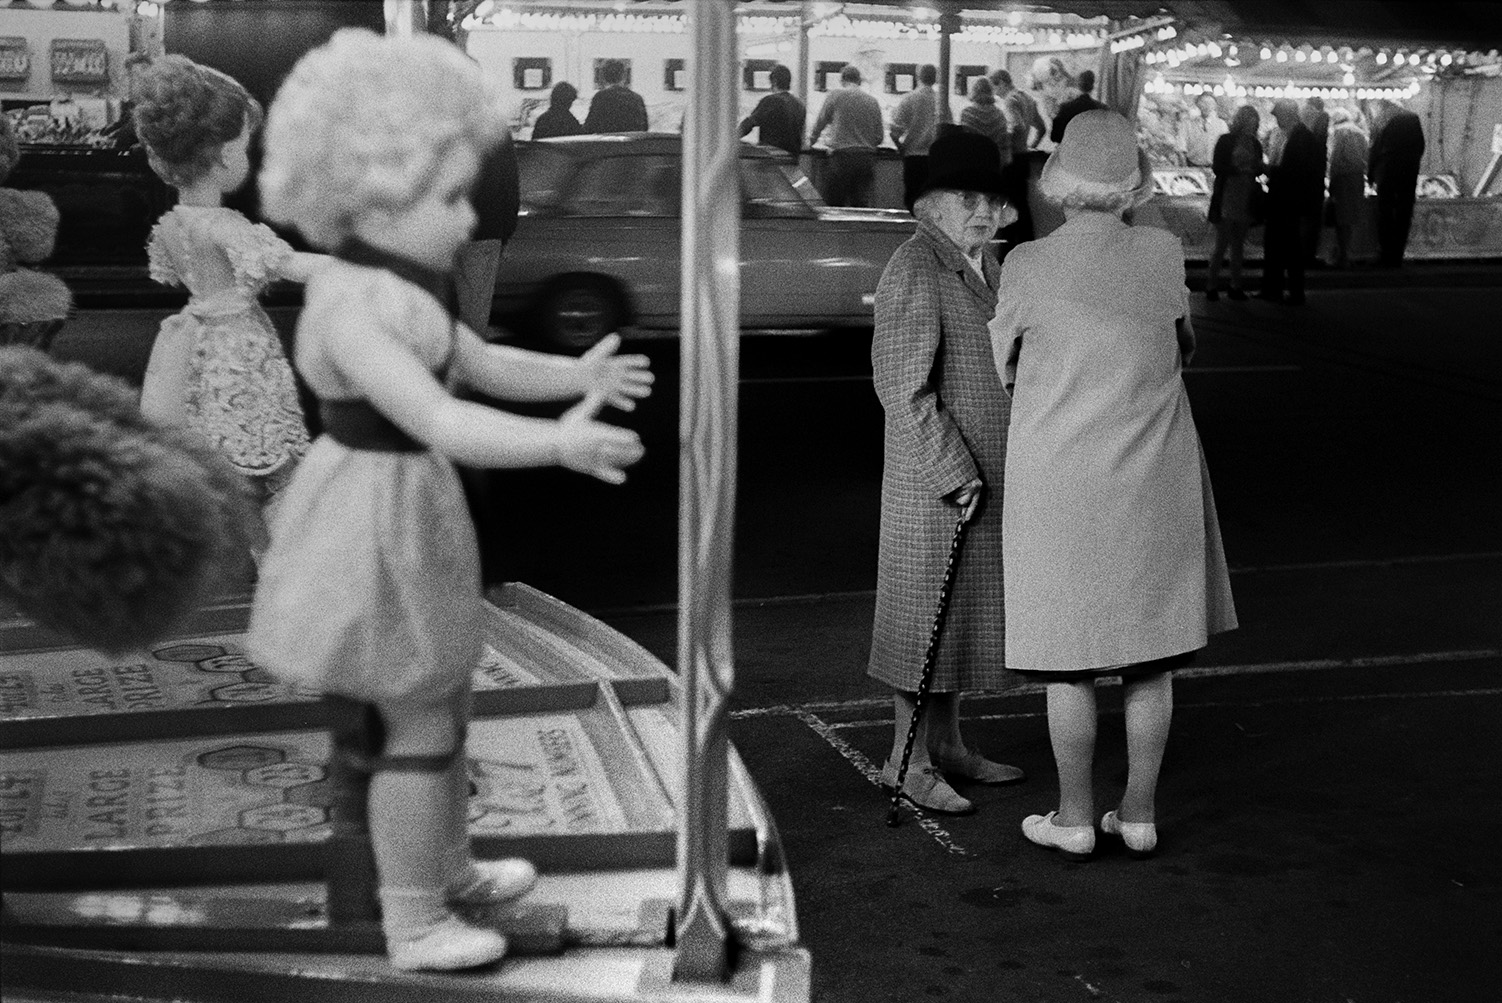 Two women talking at Bideford Fair by a fairground game with dolls. One of the women has a walking stick. Other people can be seen at fairground stalls in the background.